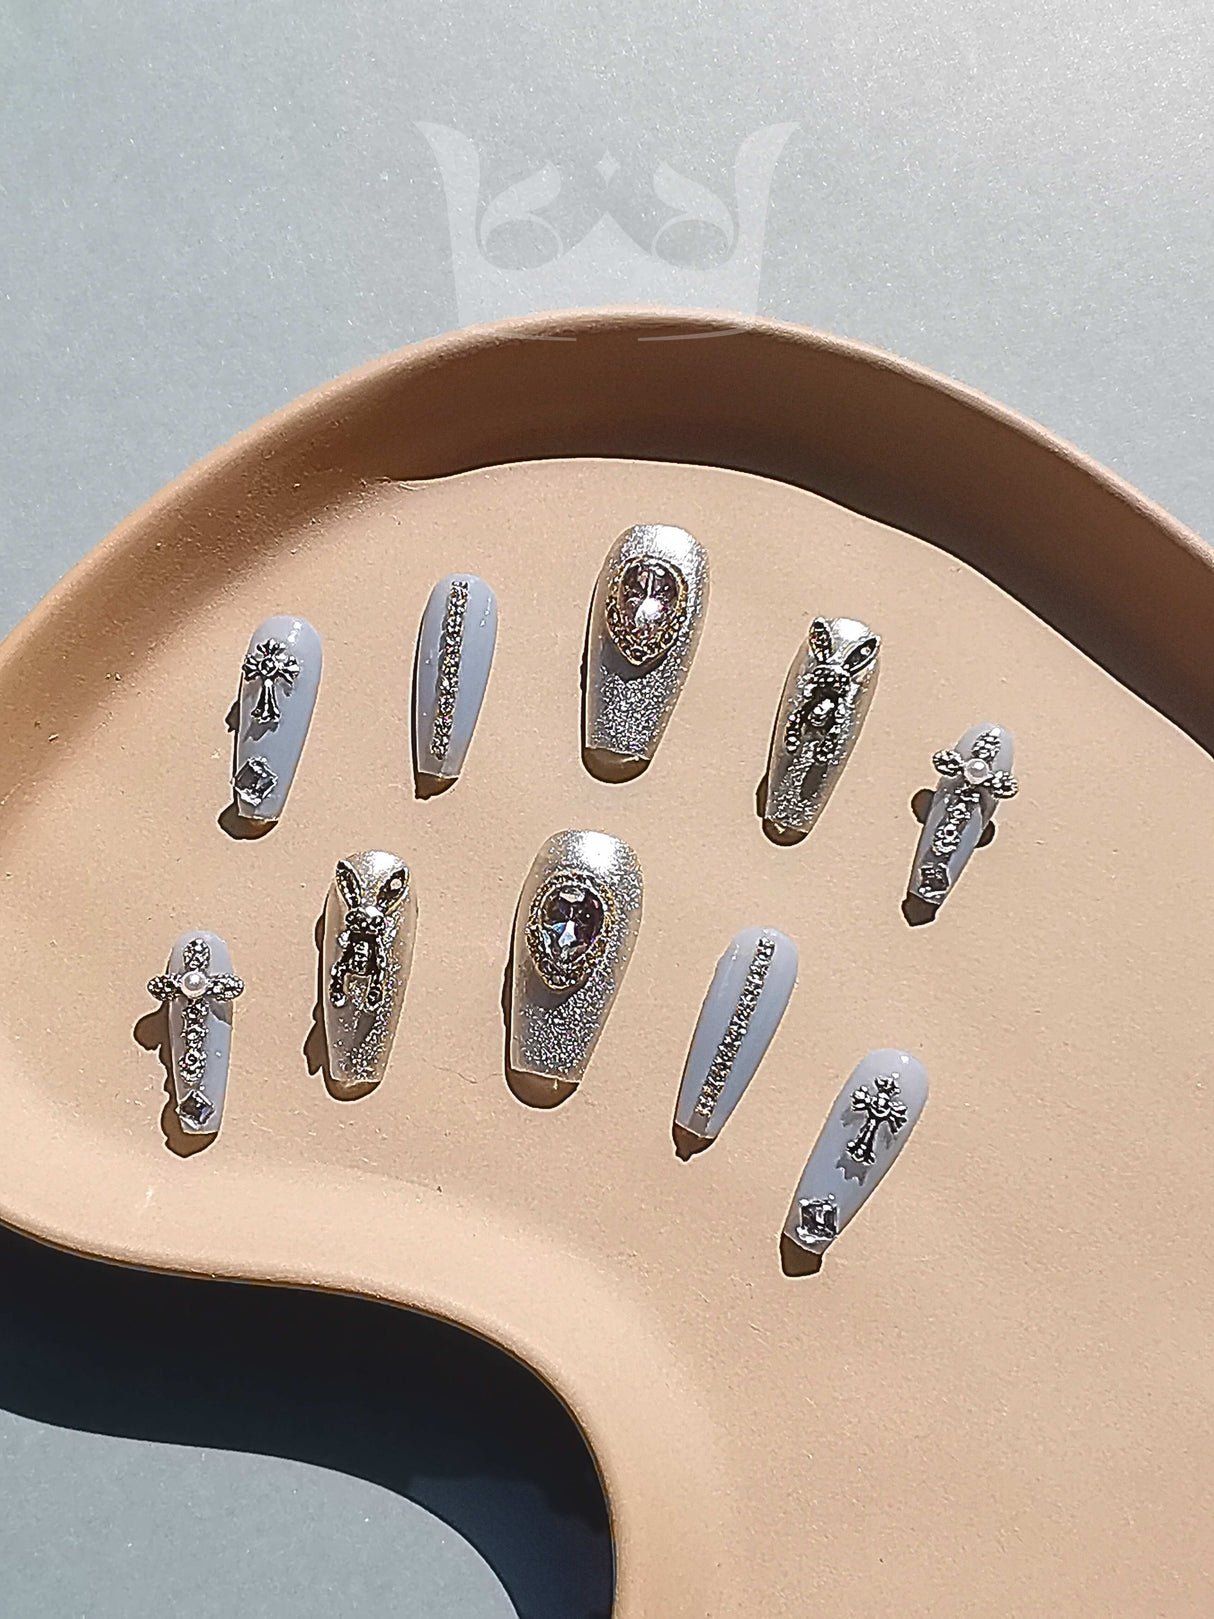 These press-on nails have a glamorous and trendy design with metallic silver base color, clear rhinestones, detailed artwork, and accent nails, suitable for special occasions.